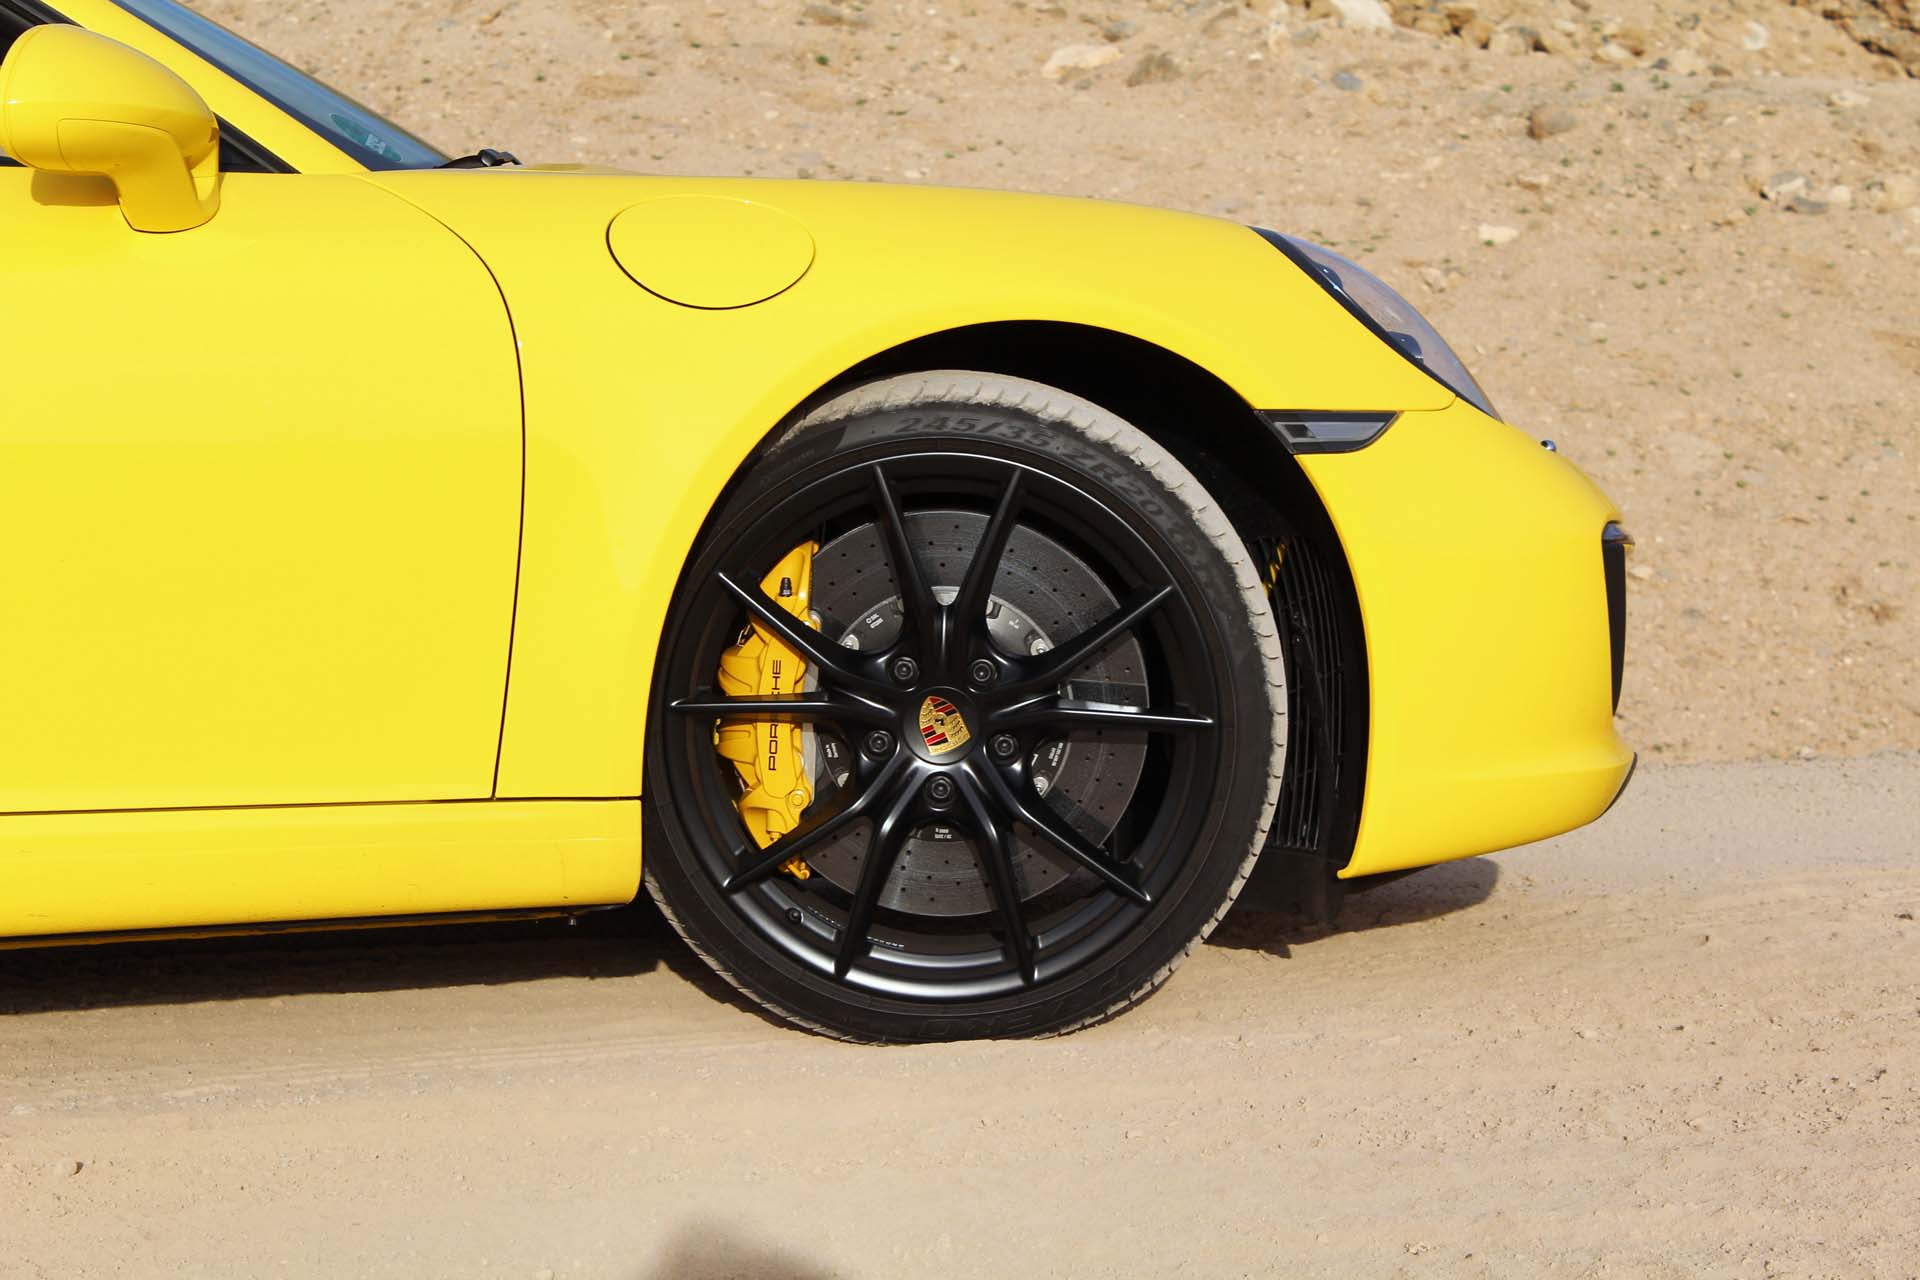 You’ll be paying $9730 for these ceramic brakes.